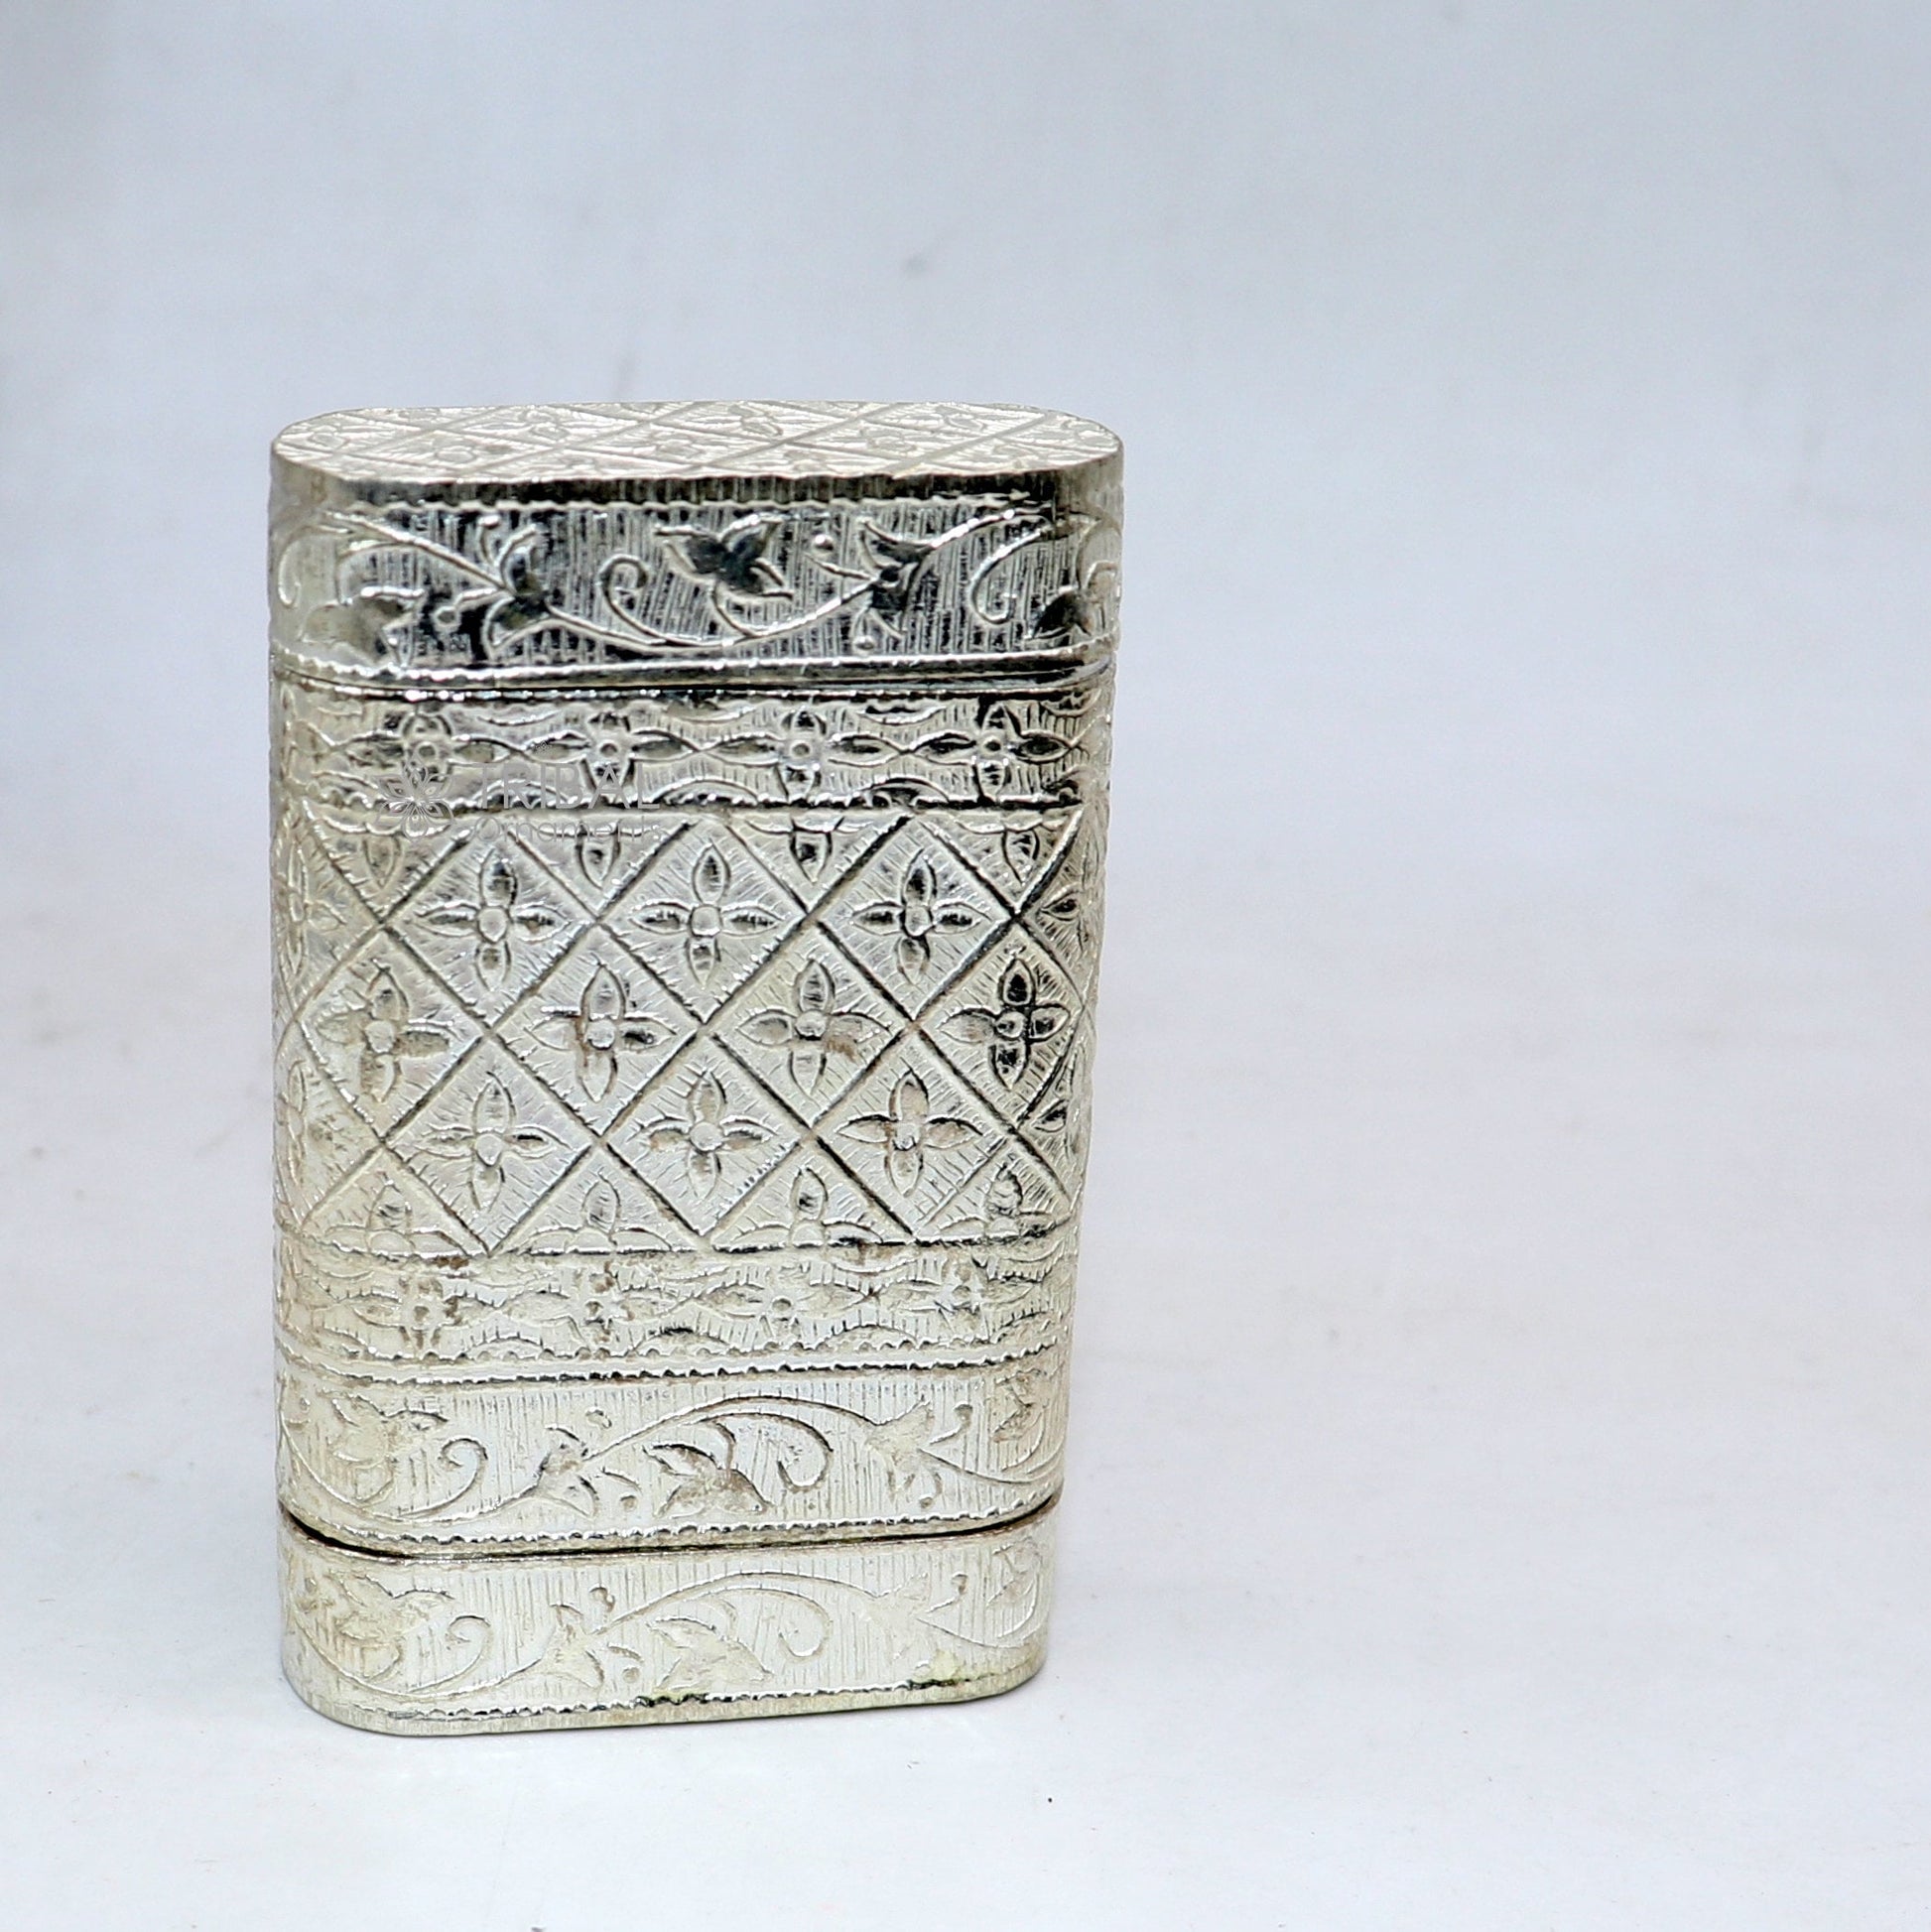 925 sterling silver handcrafted floral design 2 in1 trinket box, tobacco box, tobacco and chuna box, best gifting royal article stb825 - TRIBAL ORNAMENTS